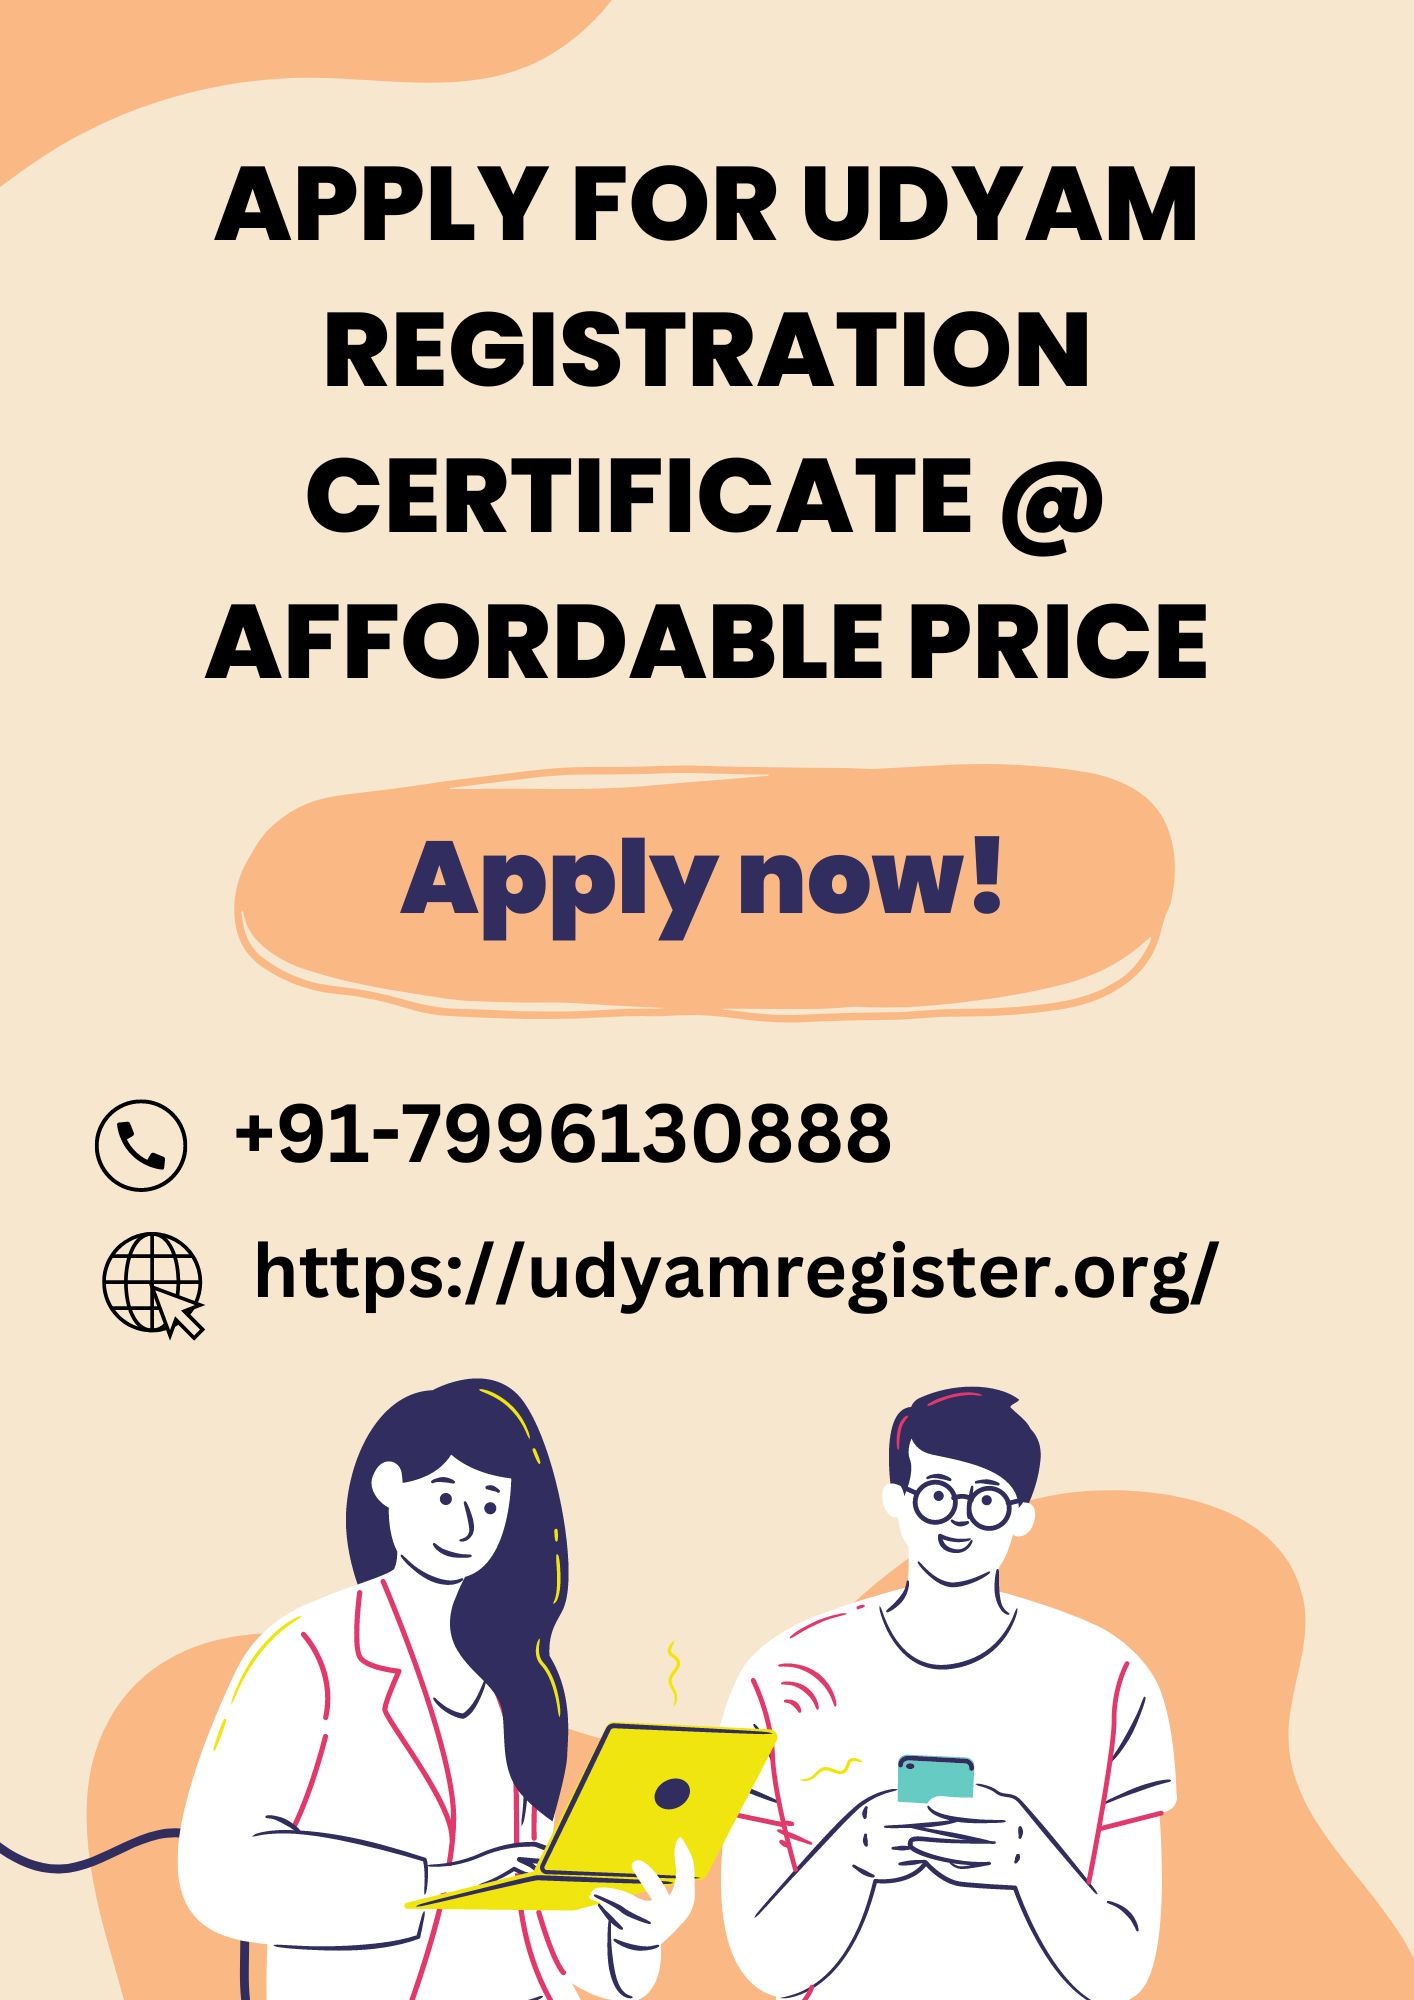 Apply for Udyam Registration Certificate @ Affordable Price